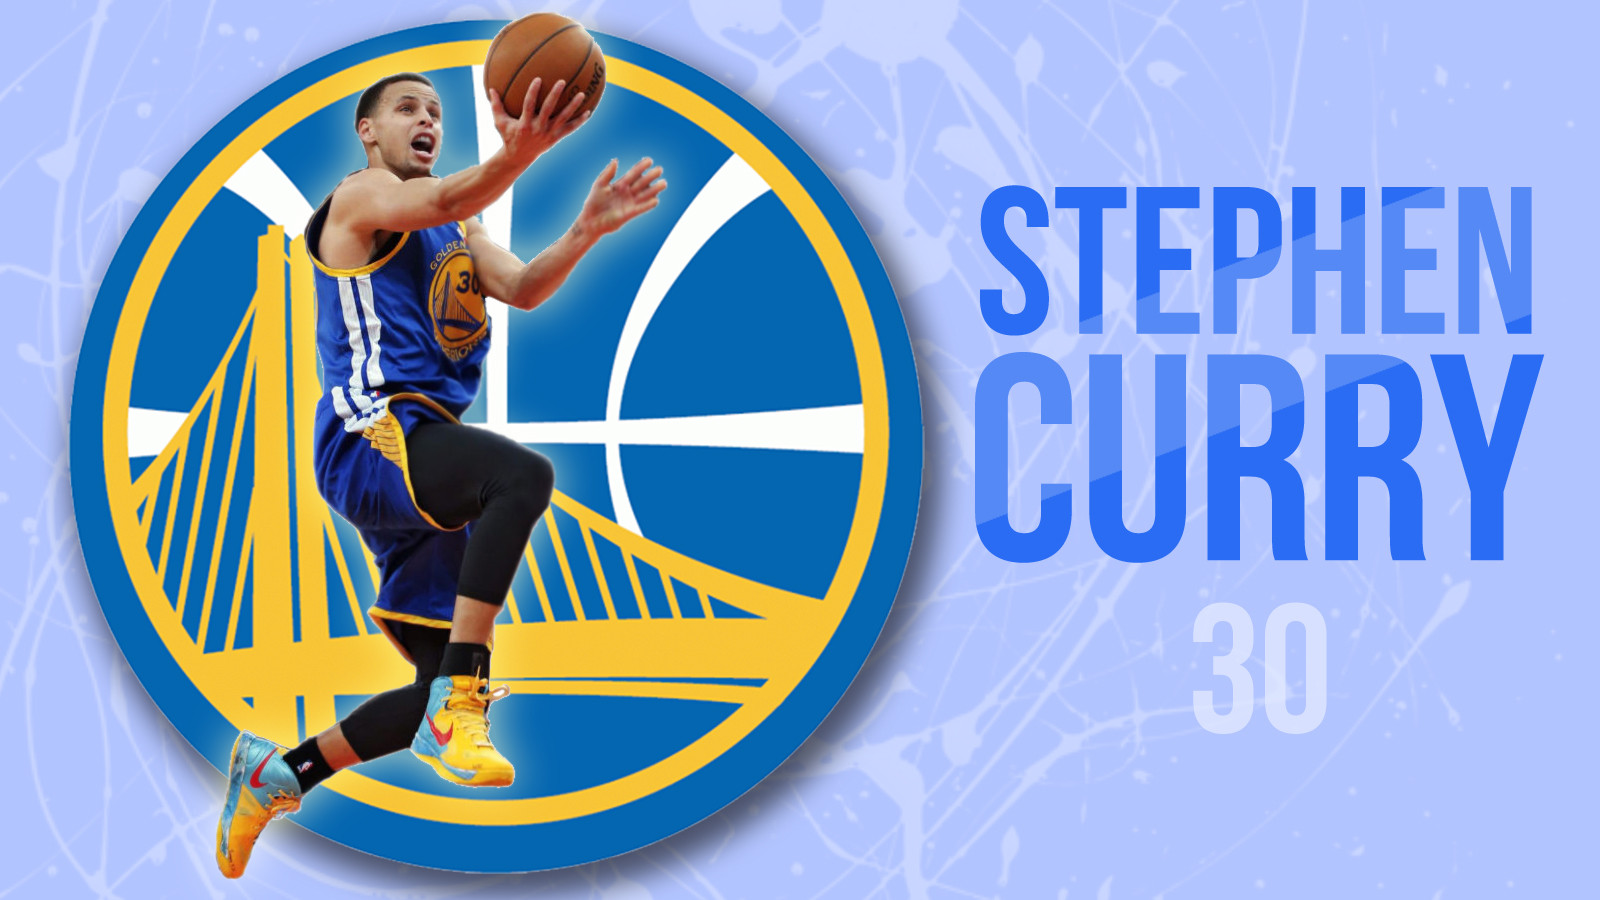 Stephen Curry 2022 Wallpapers - Wallpaper Cave